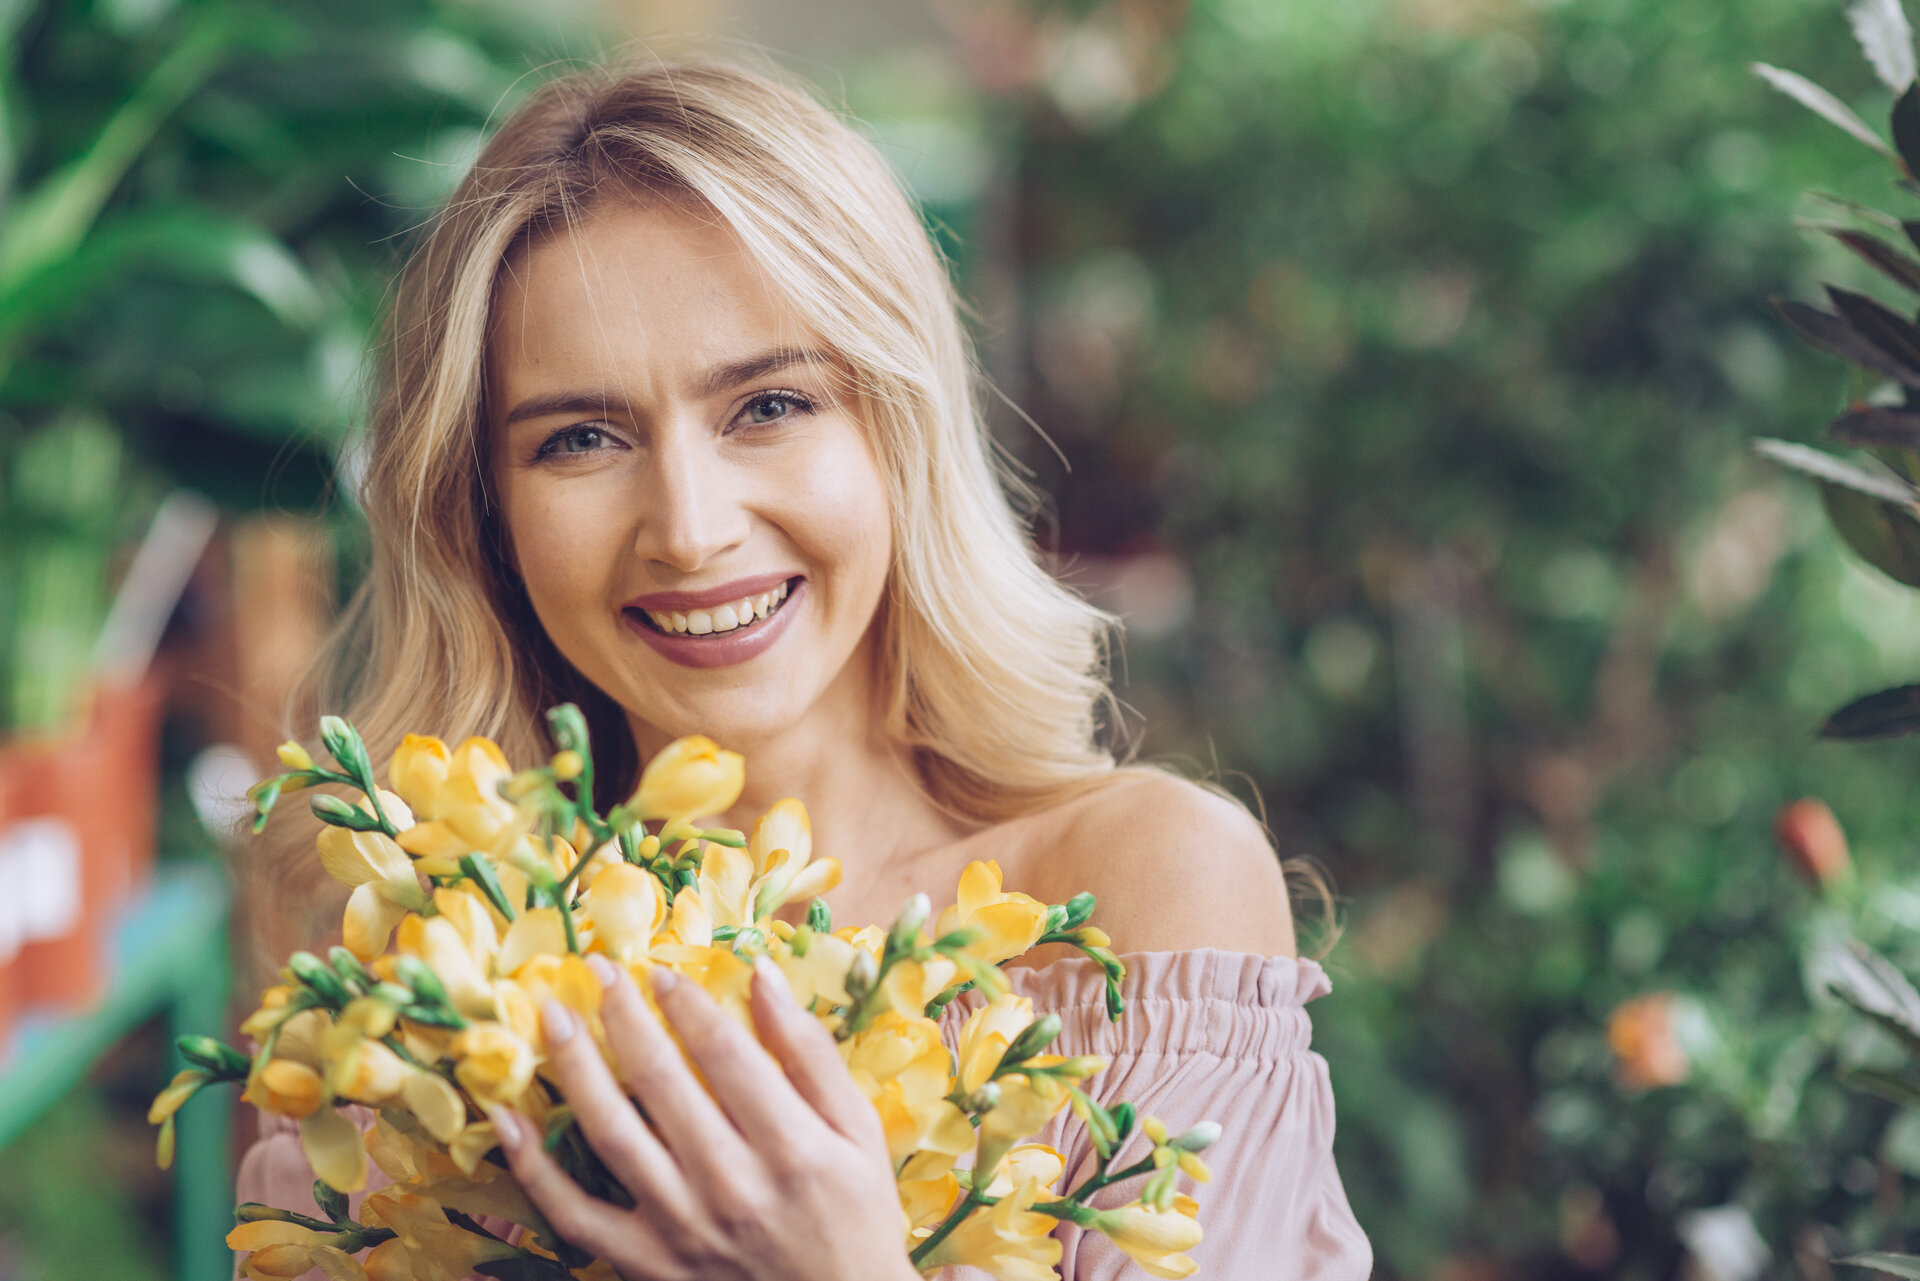 rsz_happy-woman-standing-with-yellow-flowers-bouquet